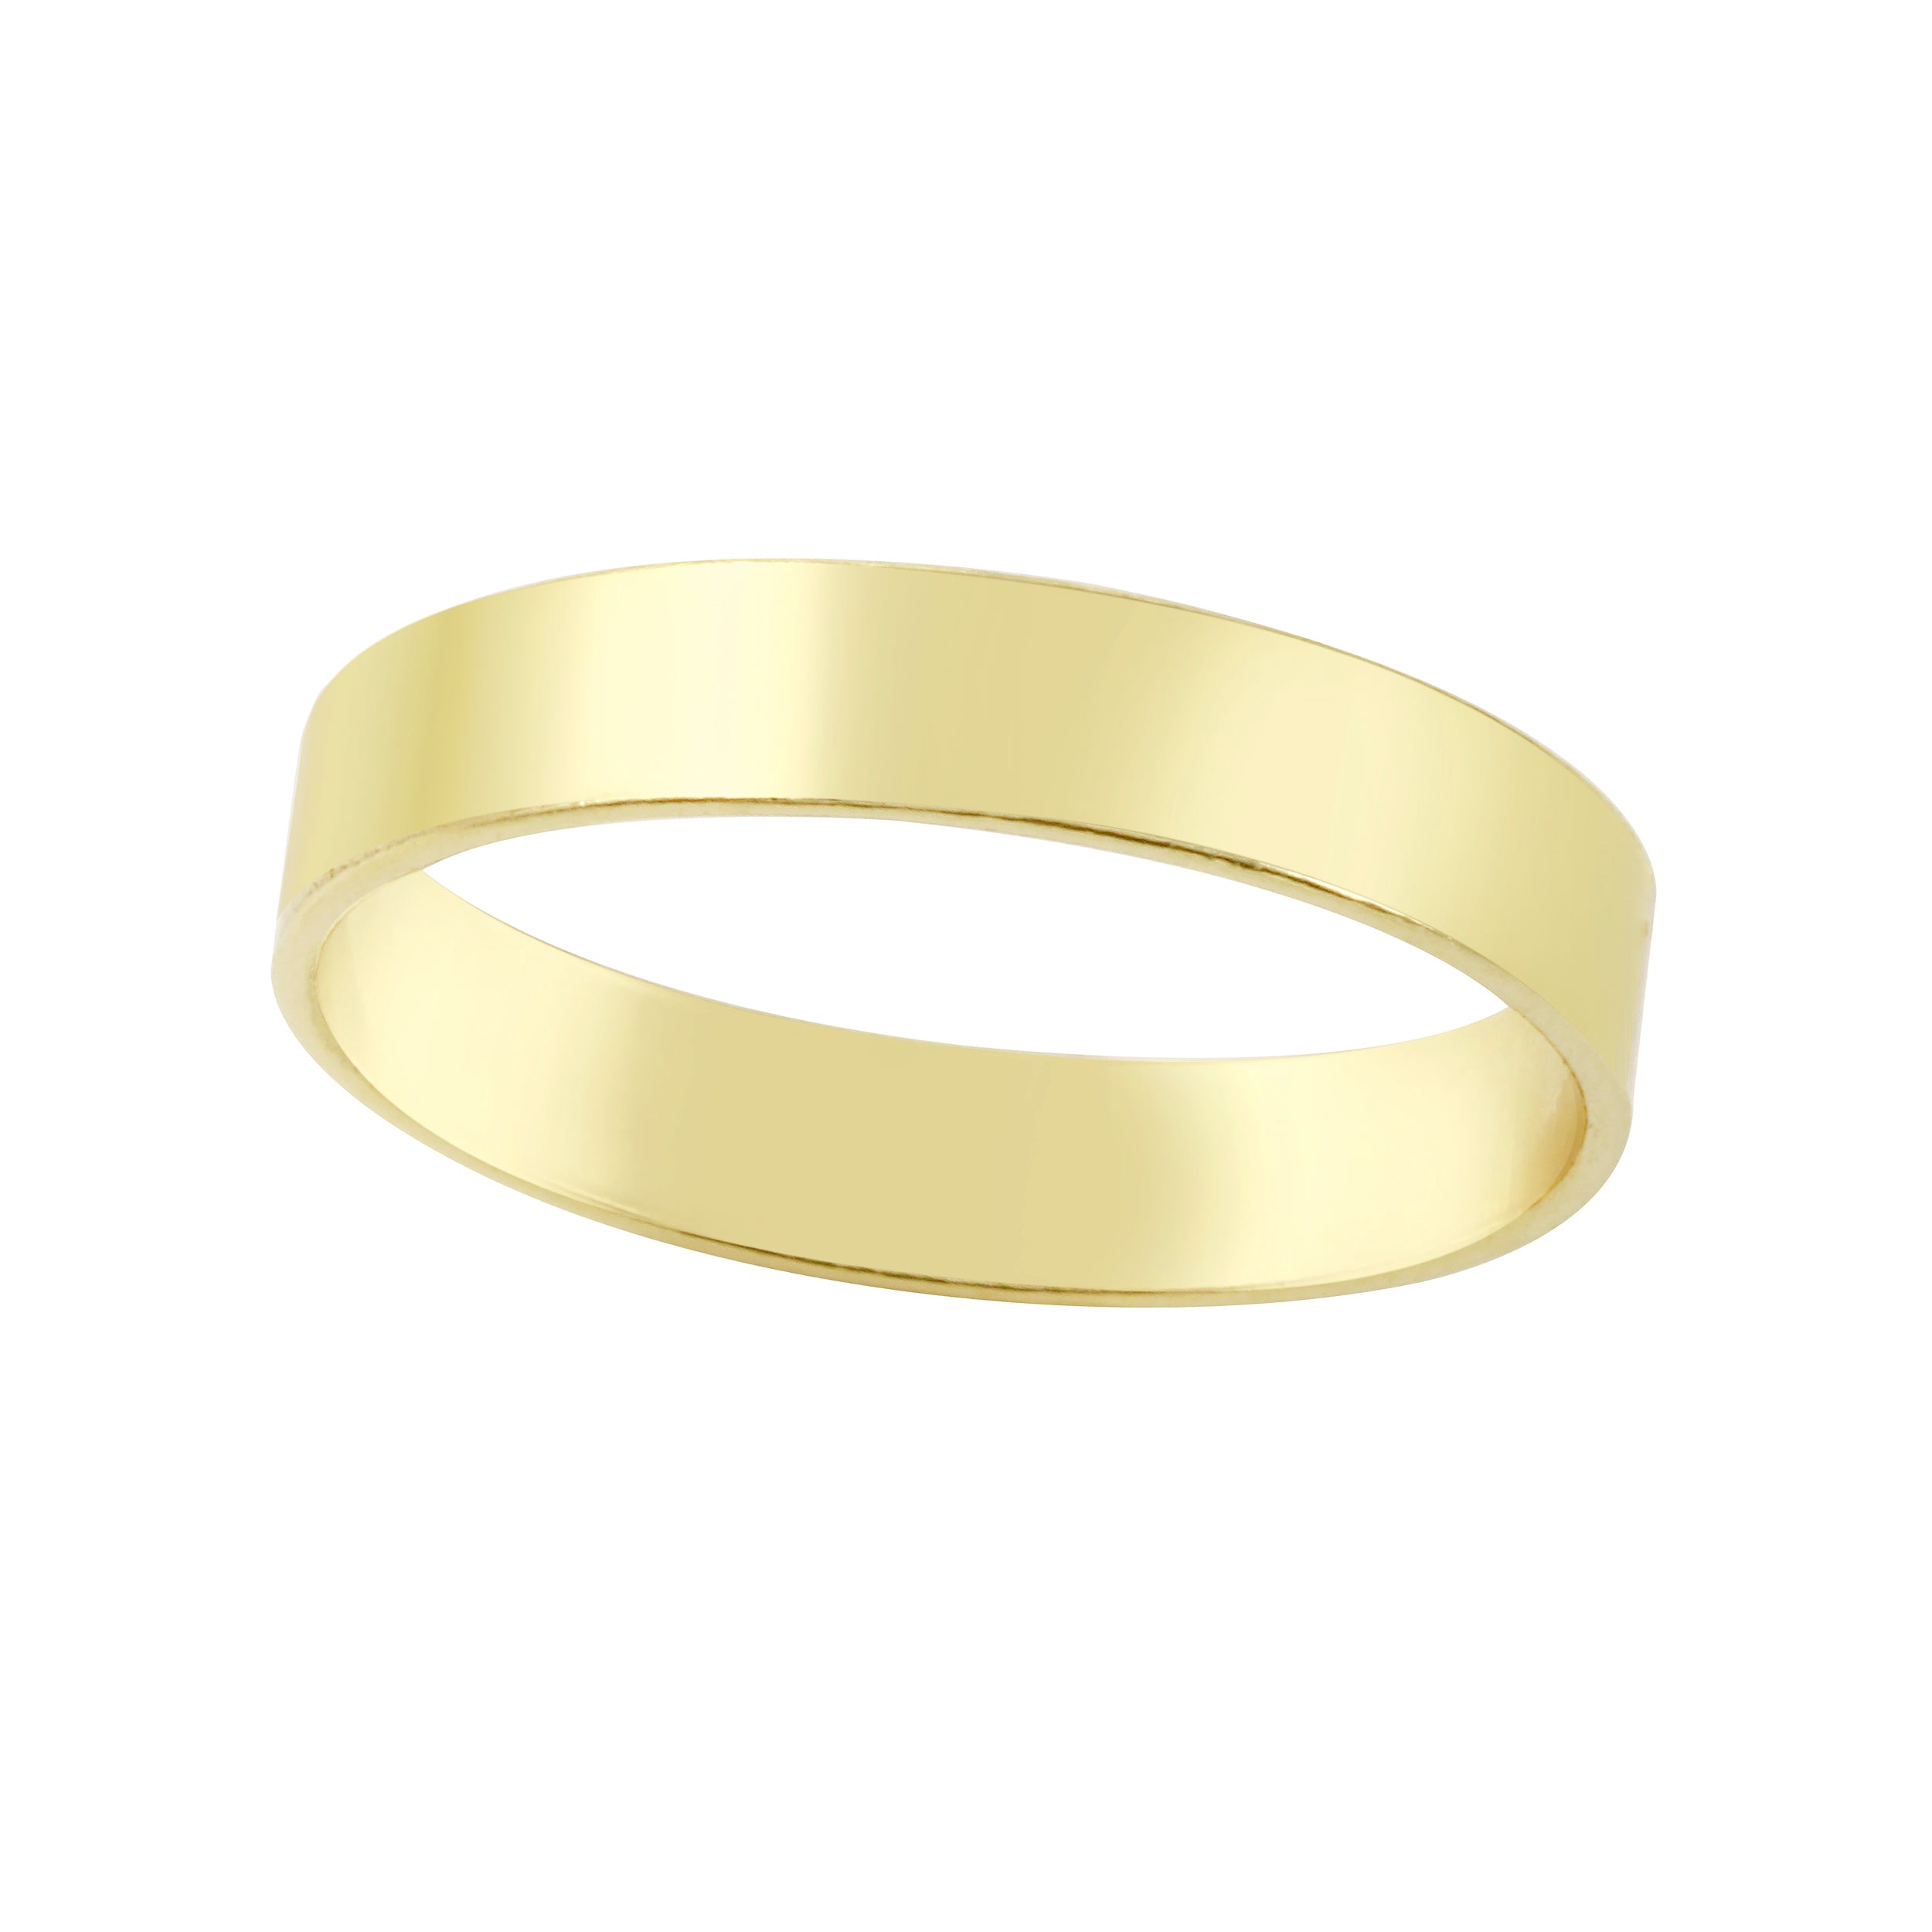 Wide Flat Gold-Filled Stacking Band-Rings-Ashley Schenkein Jewelry Design